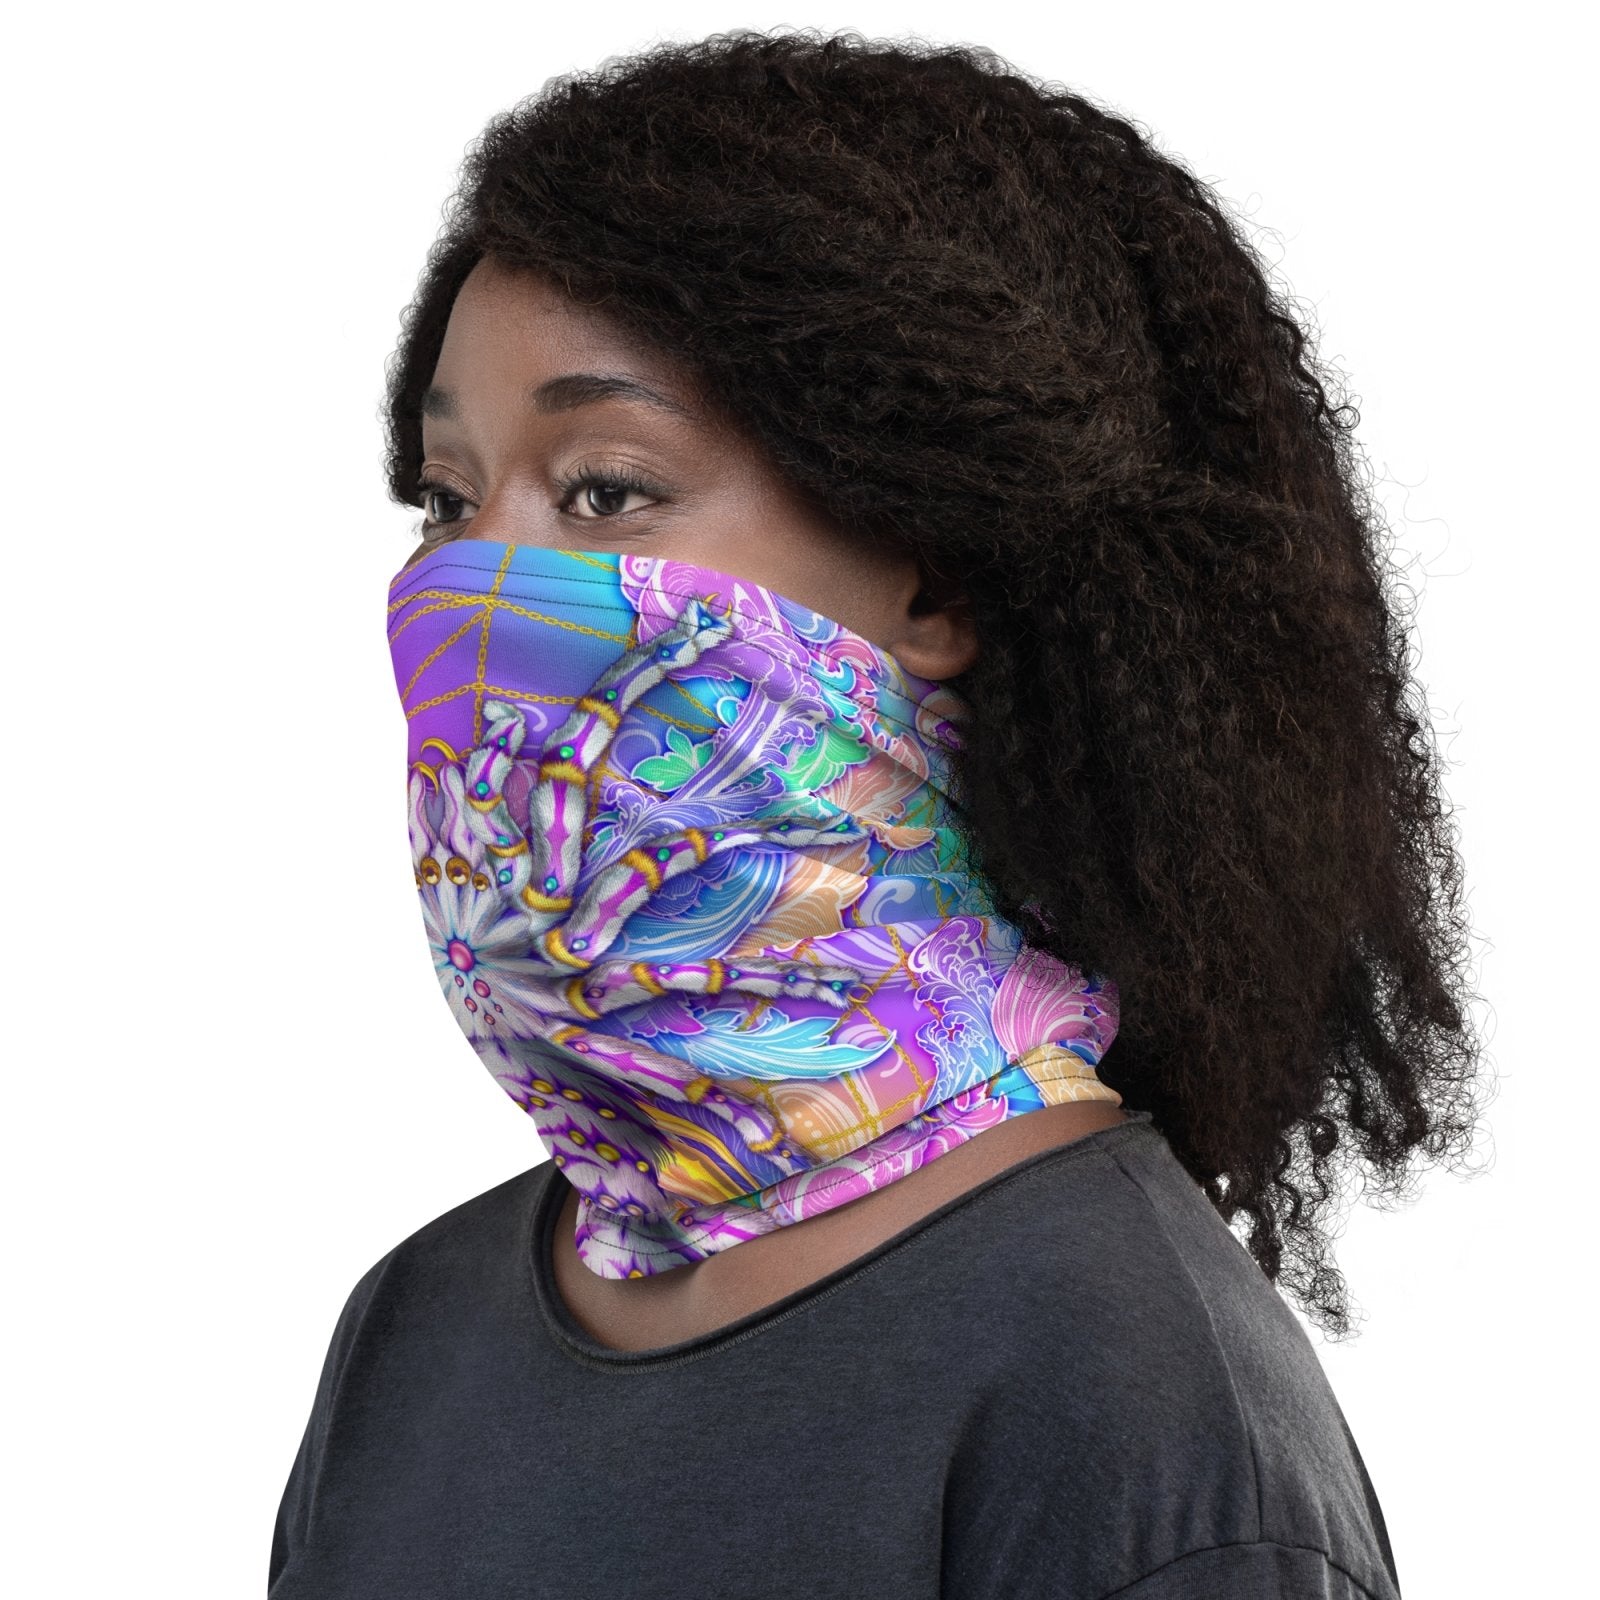 Aesthetic Neck Gaiter, Face Mask, Head Covering, Holographic Pastel, Psychedelic Rave Festival Outfit, Tarantula Lover Gift - Spider - Abysm Internal